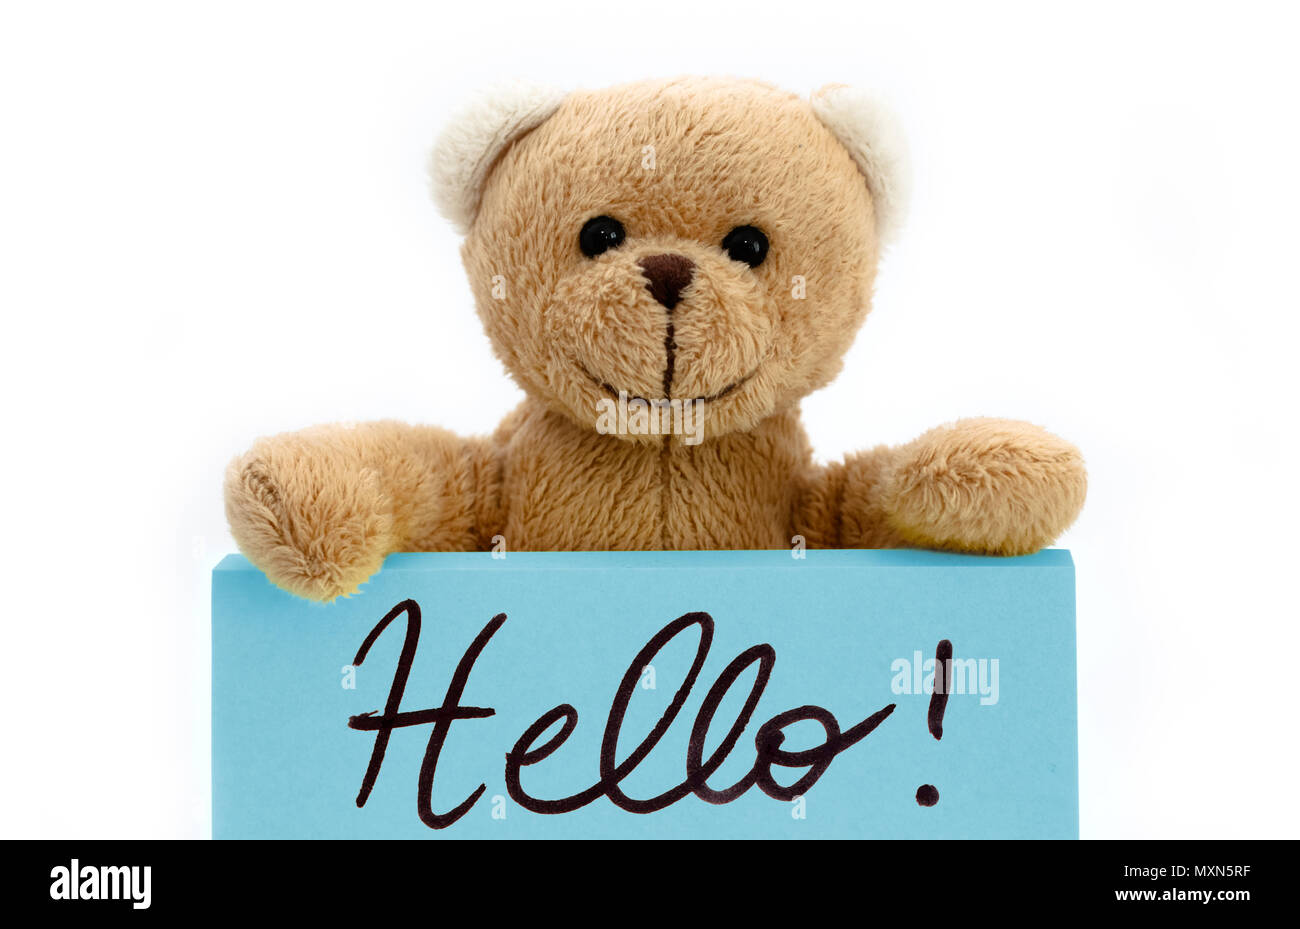 Brown teddy bear holding with the two hands a note in blue color with the handwritten message “Hello!” as welcome sign concept. Photo isolated in a se Stock Photo